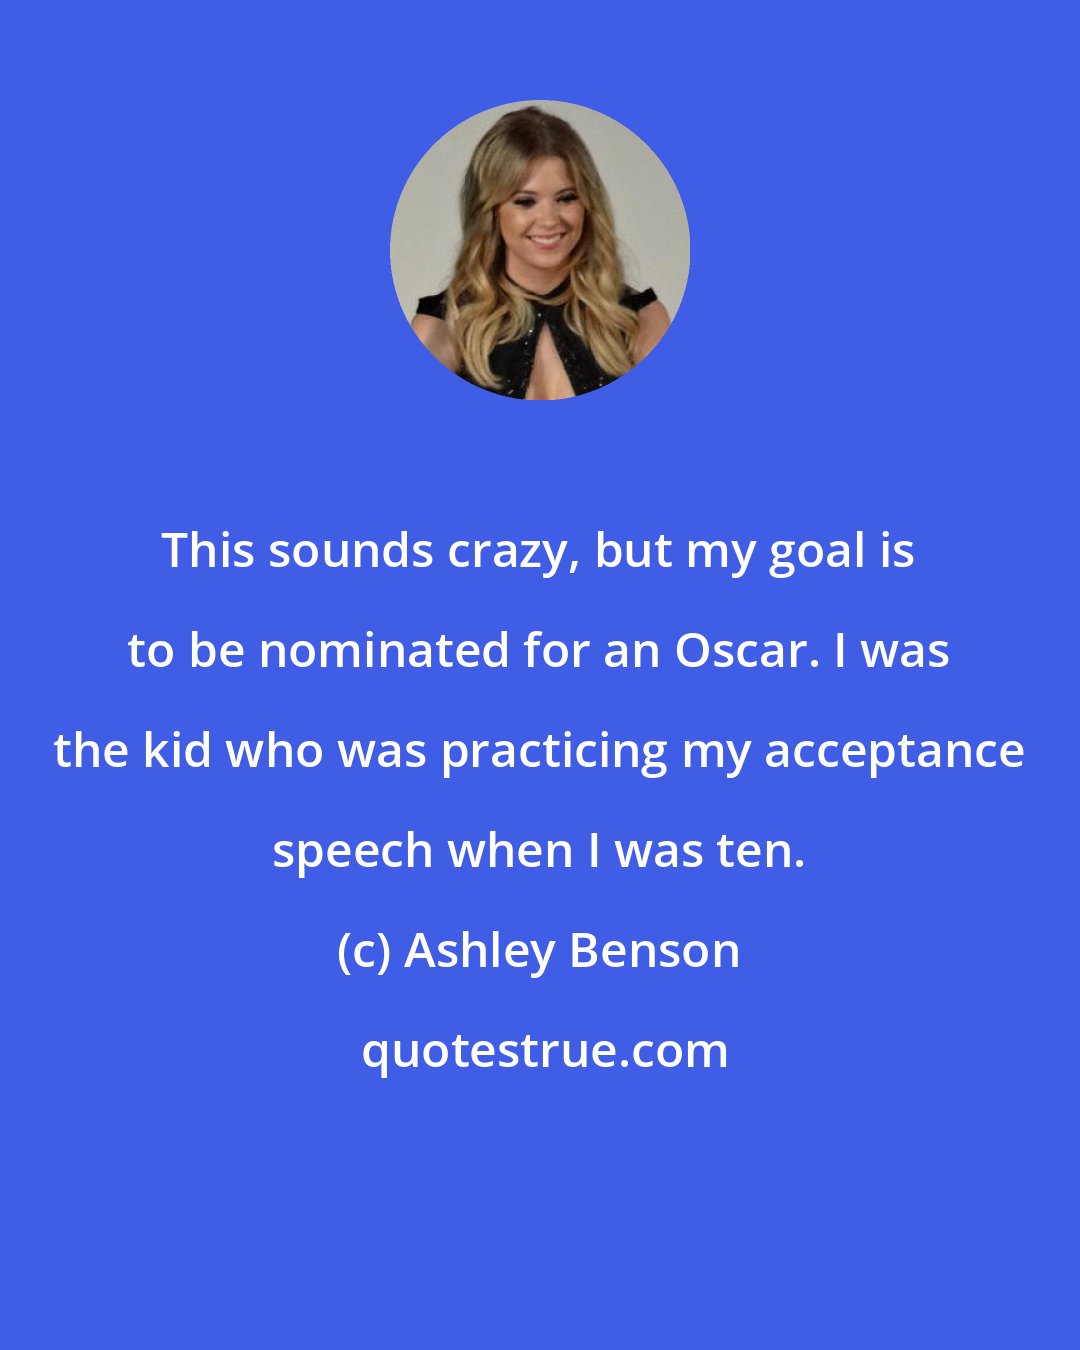 Ashley Benson: This sounds crazy, but my goal is to be nominated for an Oscar. I was the kid who was practicing my acceptance speech when I was ten.